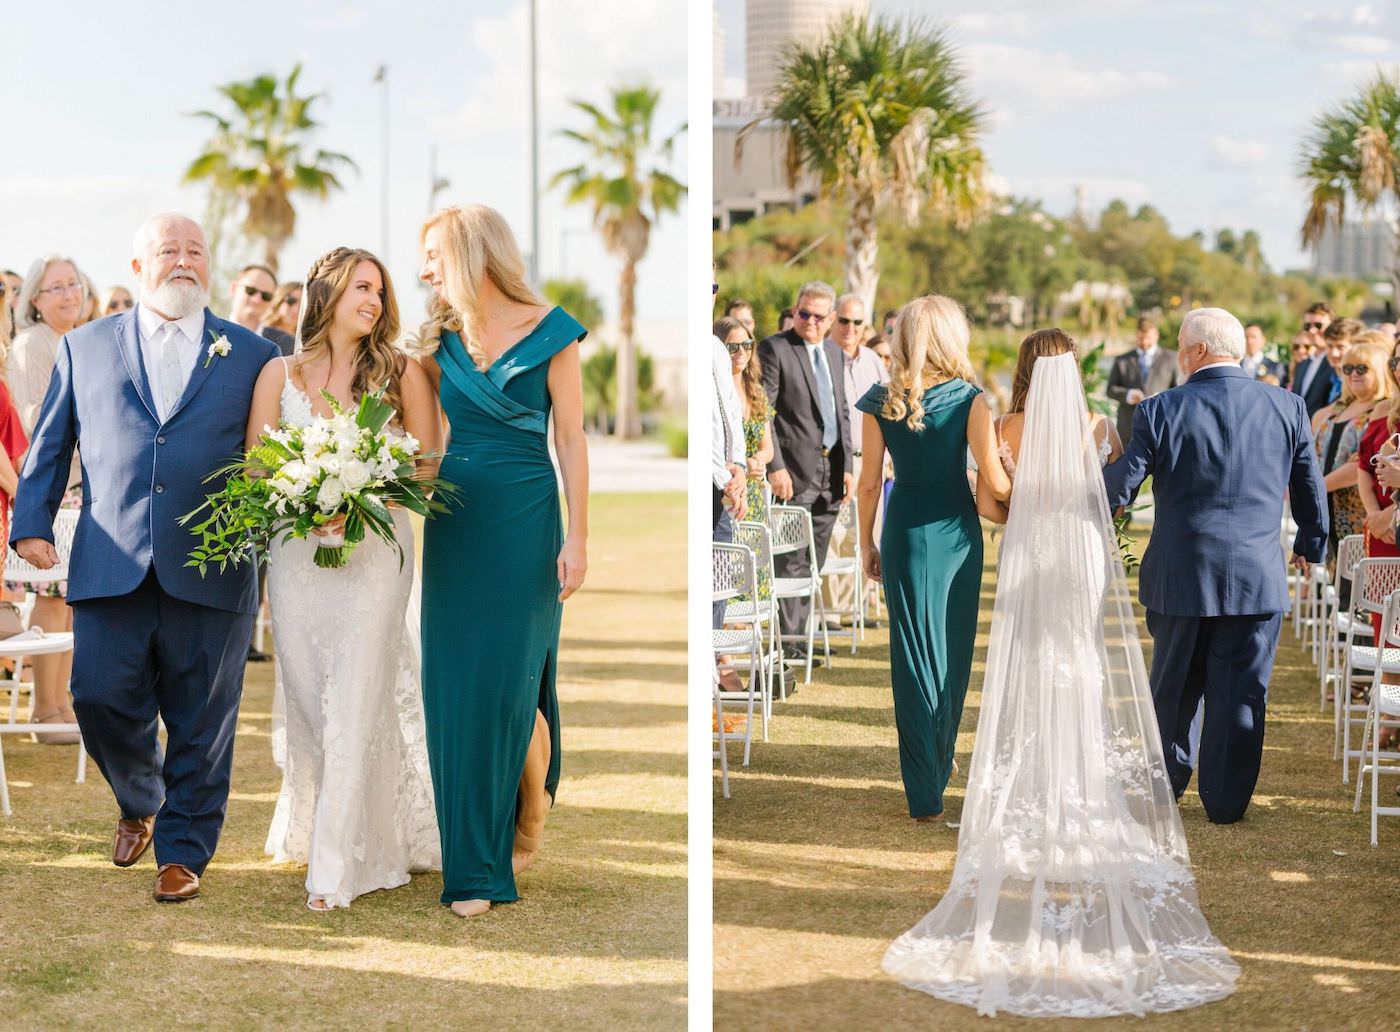 Bride Walking Down the Aisle with Mom and Dad during Outdoor Wedding Ceremony | Long Cathedral Lace Edge Veil | Tropical Tampa Wedding